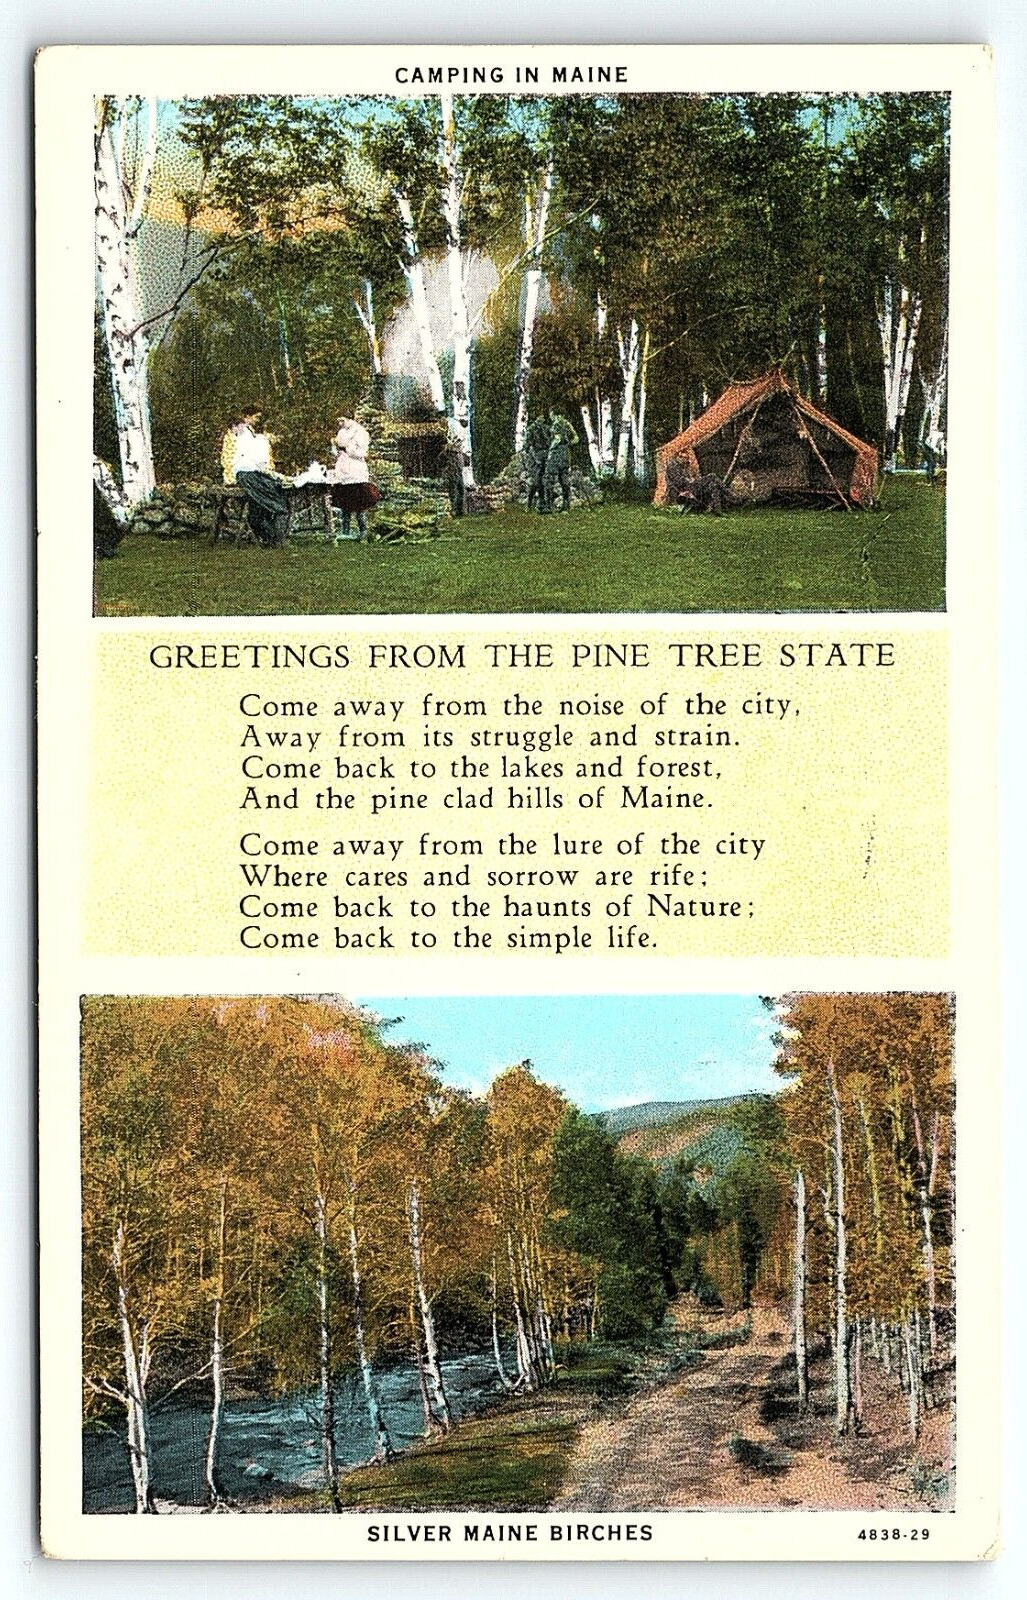 1920s MAINE GREETINGS FROM THE PINE TREE STATE CAMPING BIRCHES POSTCARD P3409